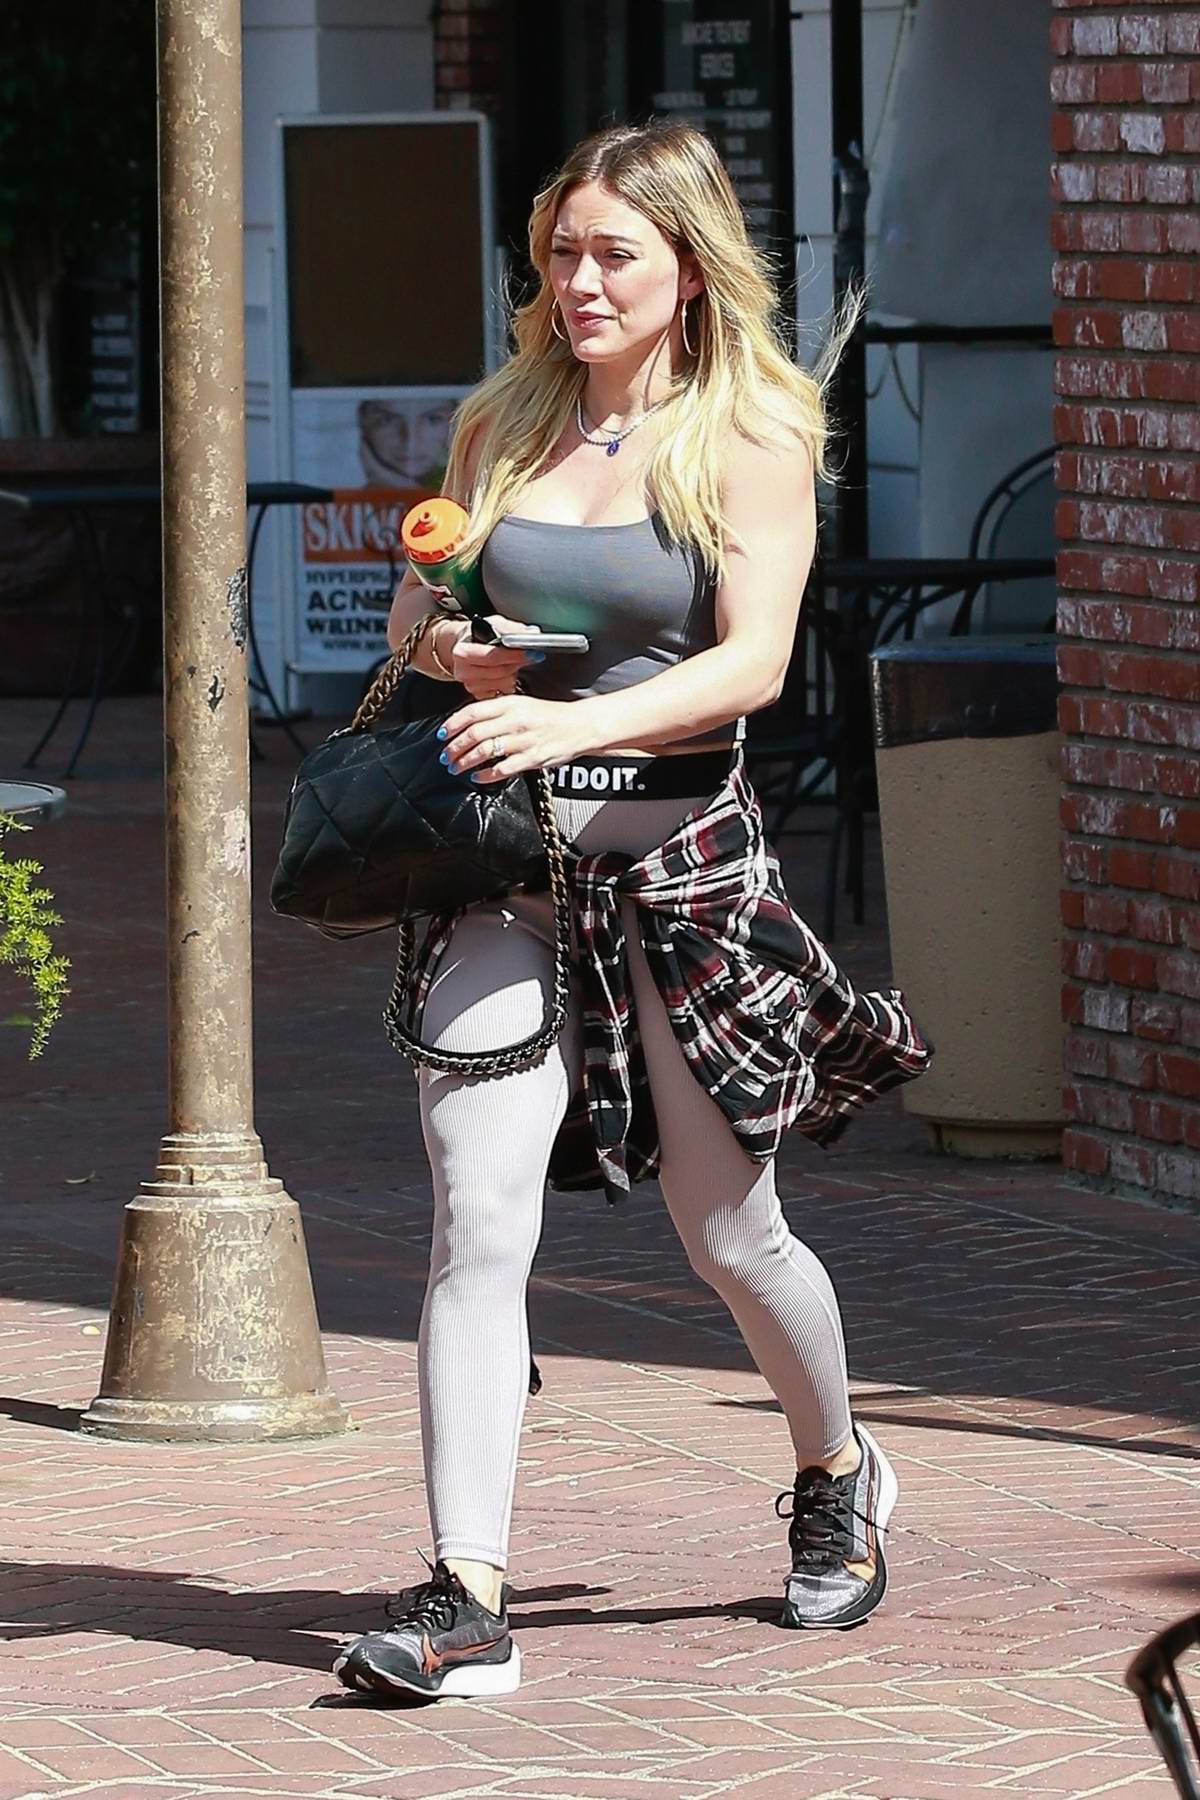 https://www.celebsfirst.com/wp-content/uploads/2020/03/hilary-duff-looks-great-in-nike-leggings-and-a-grey-tank-top-as-she-leaves-the-gym-in-studio-city-california-060320_5.jpg